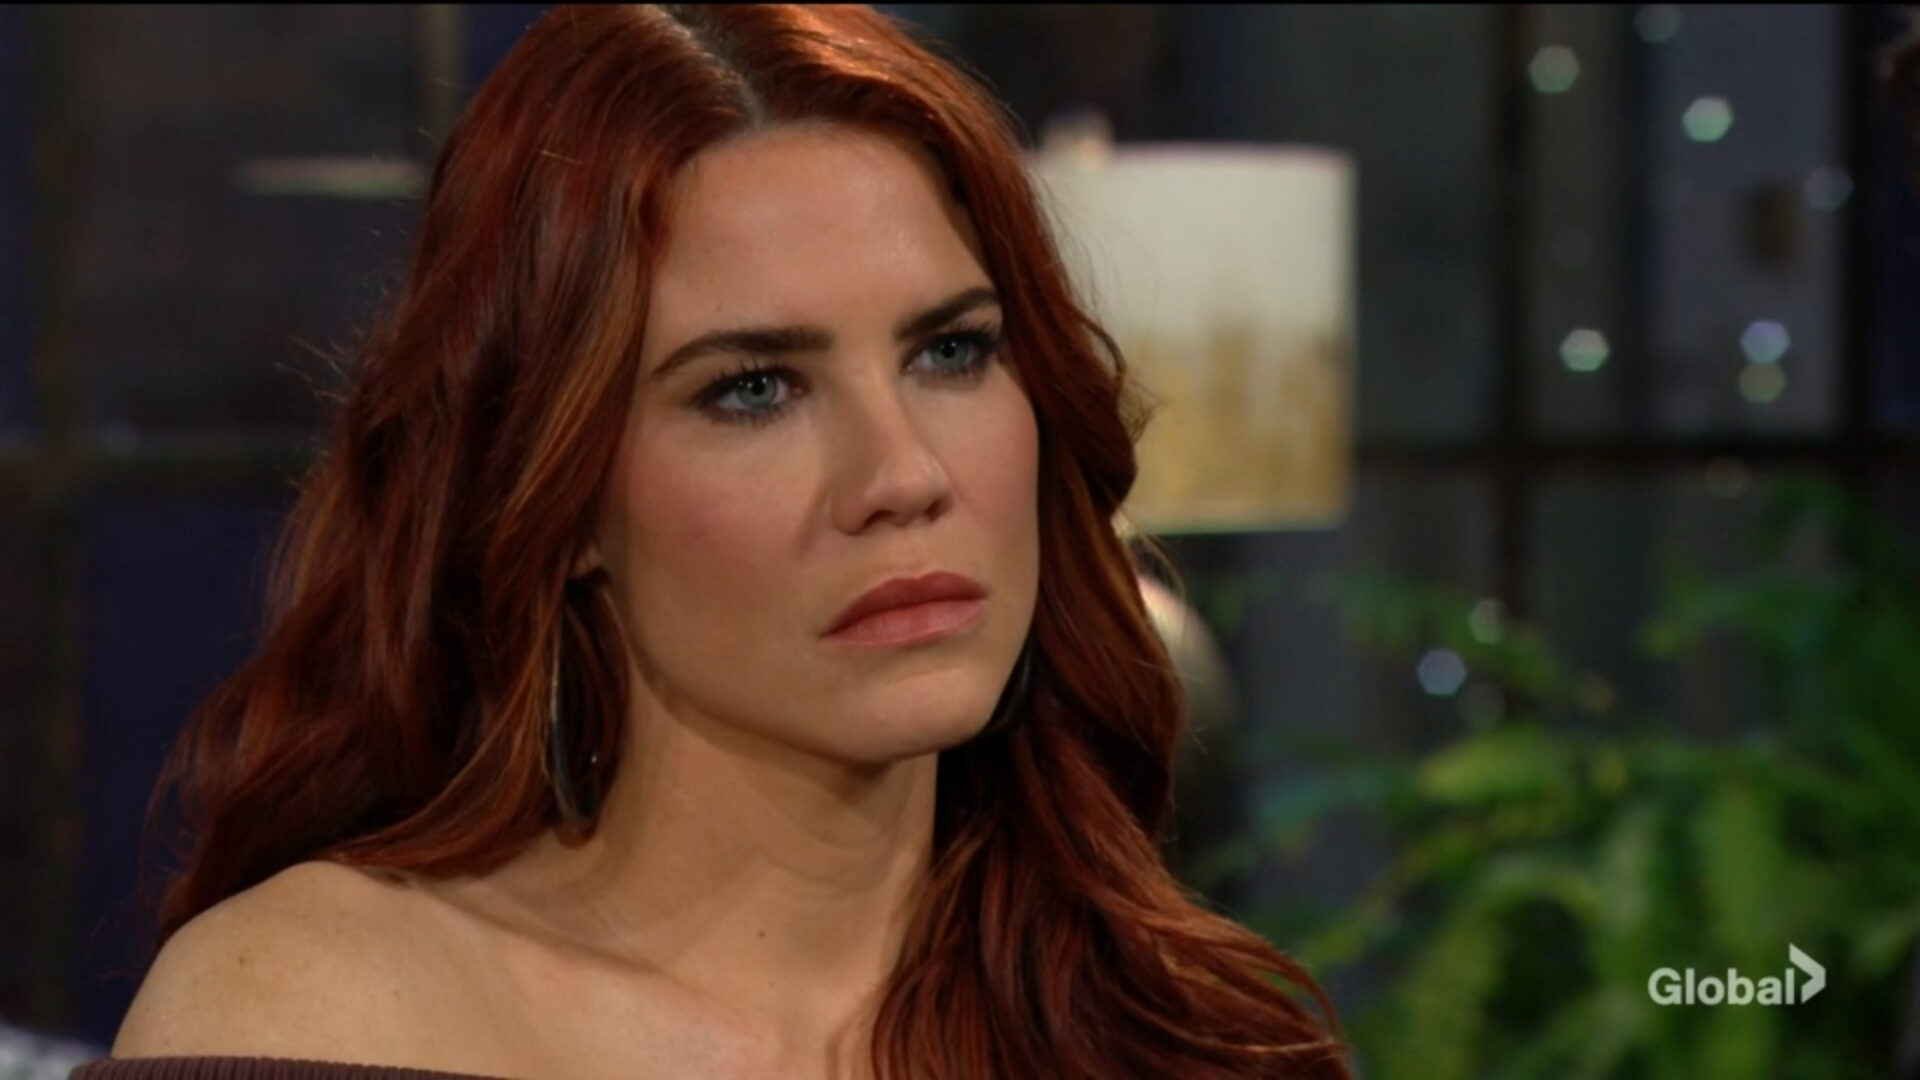 sally is upset with adam for going behind her back